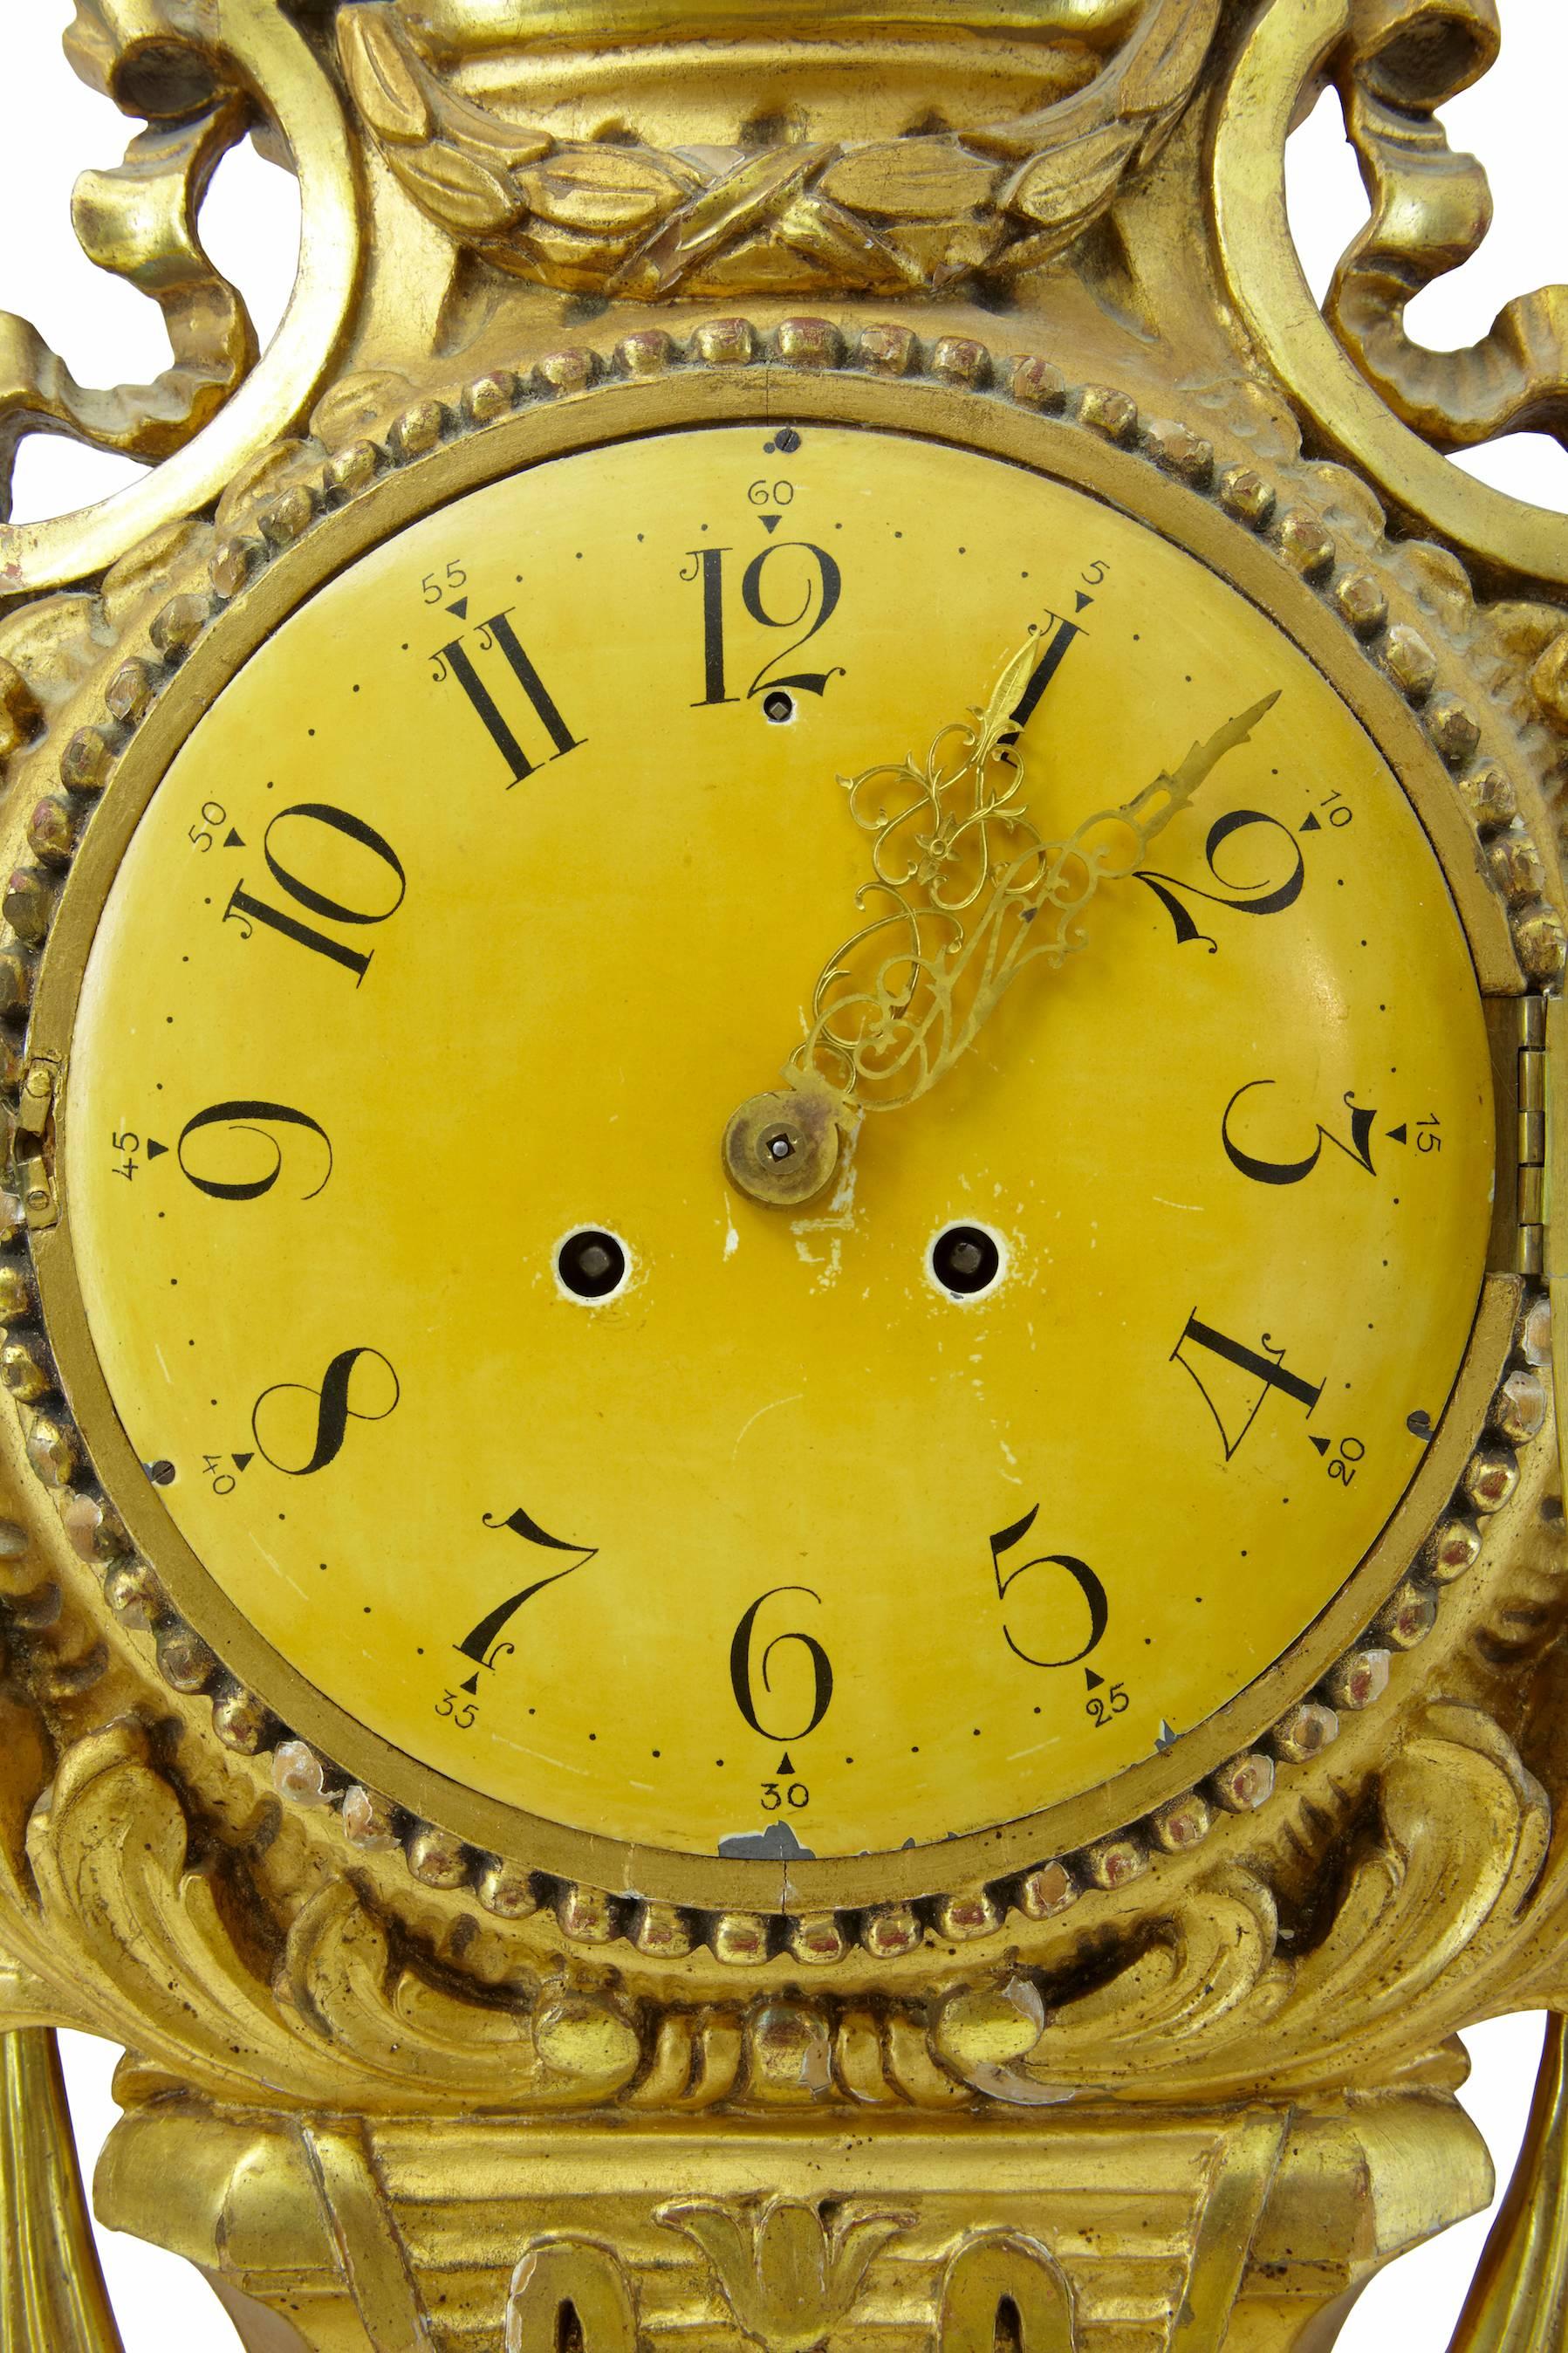 Fine quality clock in untouched condition circa 1930.
Carved on the reverse with the date 28/3 - 1934.
Carved with florals and swags very much in the rococo taste.
Original glass.
Marks to dial and minor enamel loss.
Some losses to